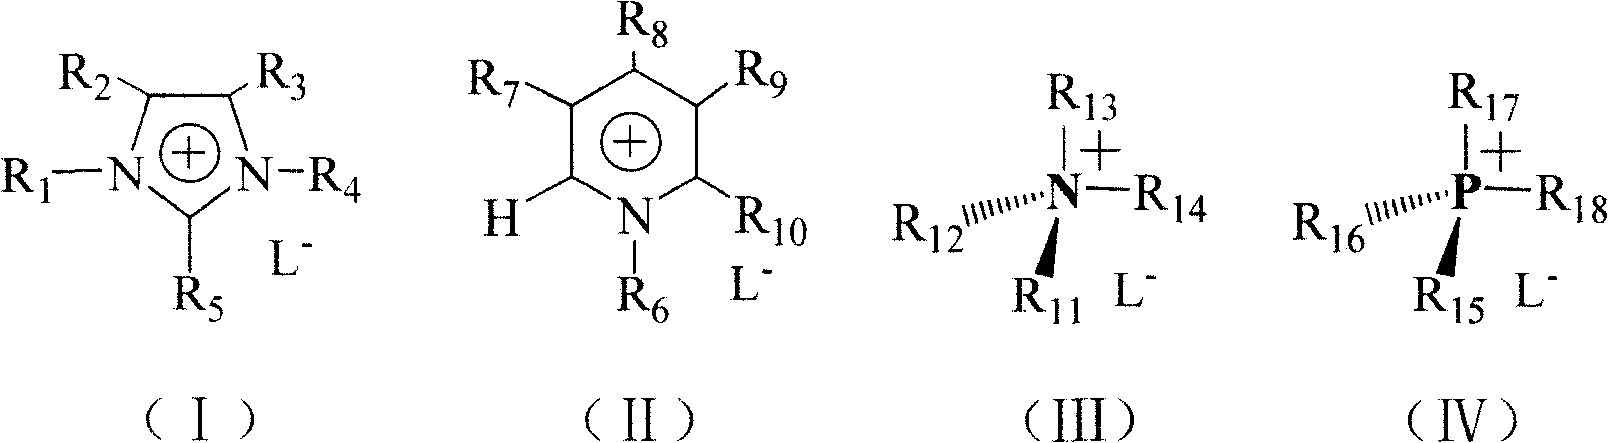 Production method for lodixanol hydrolysate